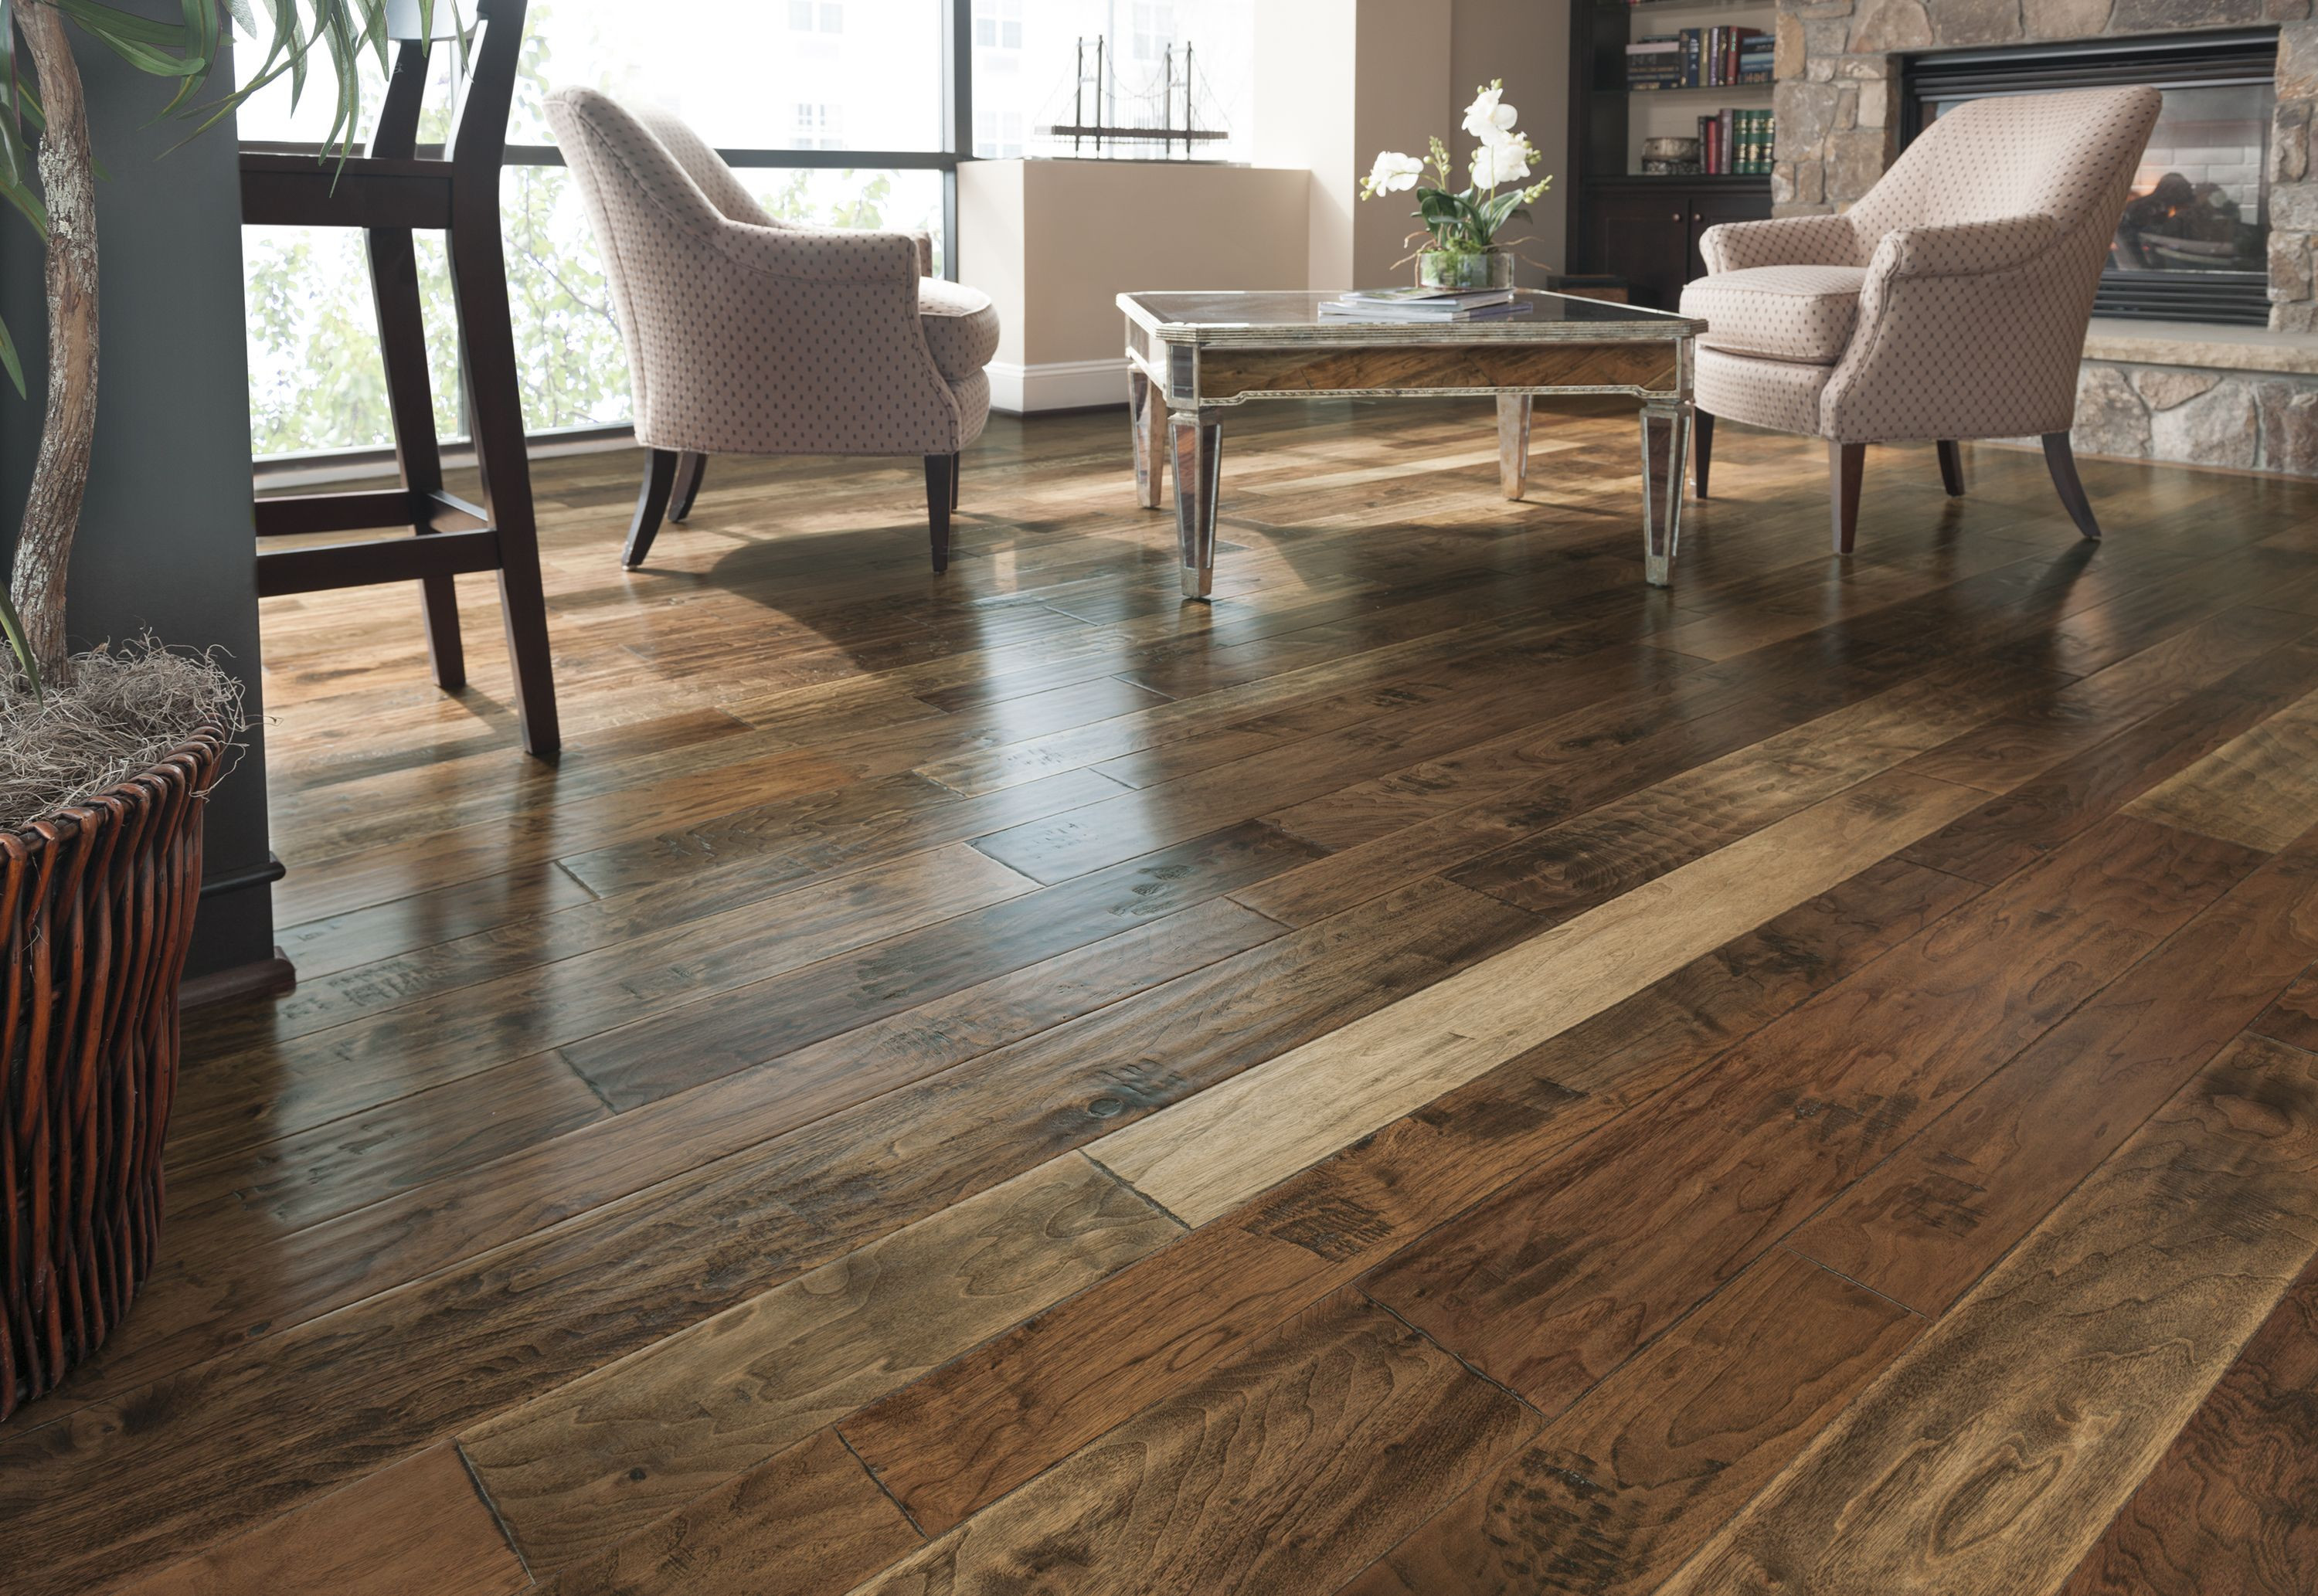 24 Lovely 3mm Engineered Hardwood Flooring 2024 free download 3mm engineered hardwood flooring of hardwood flooring service floor plan ideas for hardwood flooring service toll brothers installed this fantastic wood floor in their chantilly